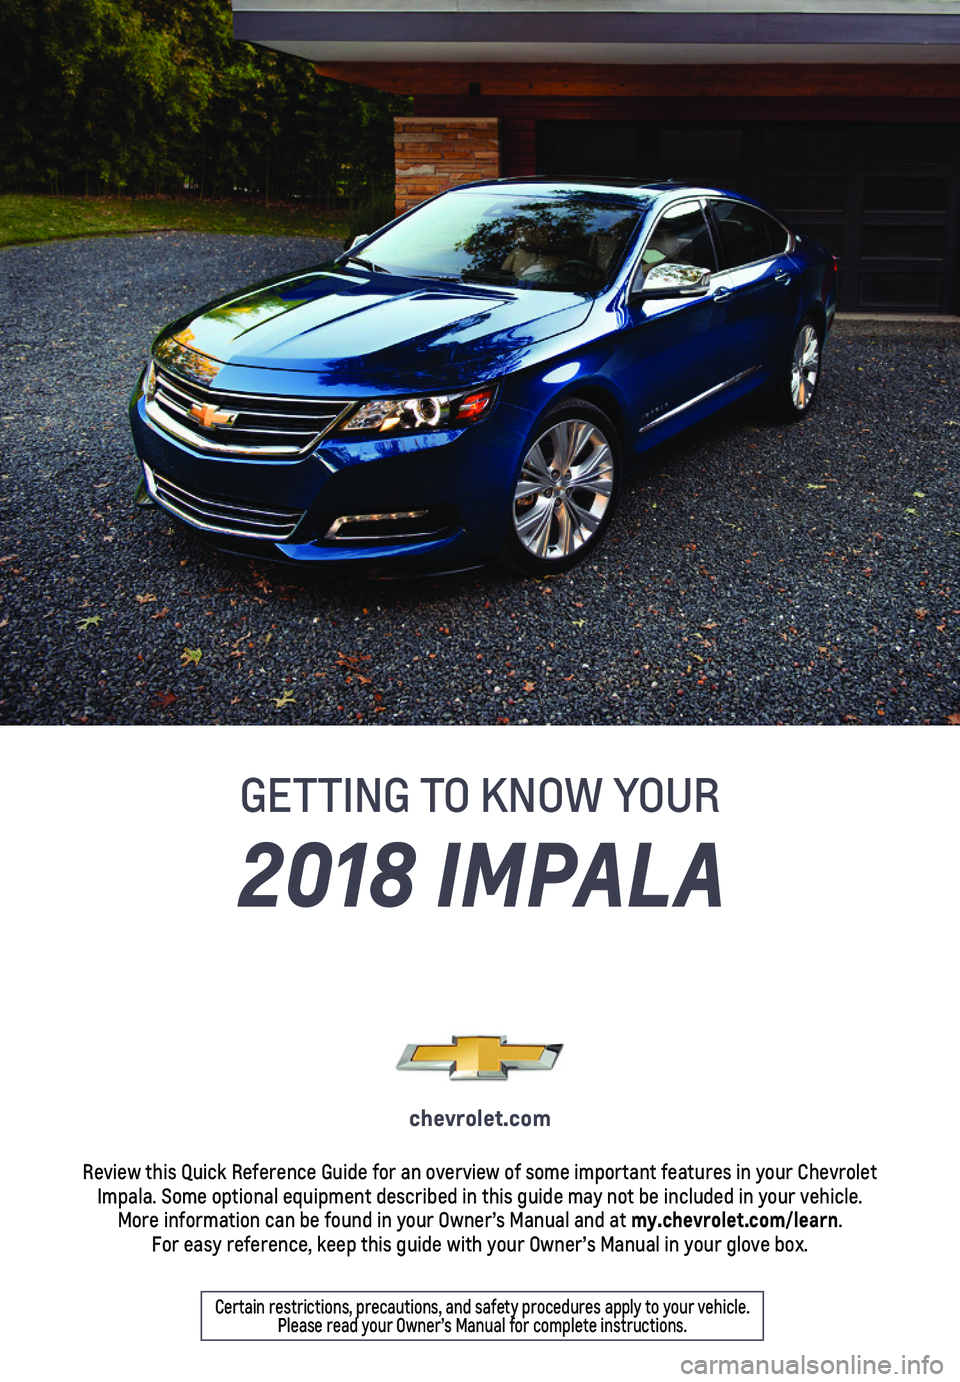 CHEVROLET IMPALA 2018  Get To Know Guide 1
chevrolet.com
Review this Quick Reference Guide for an overview of some important feat\
ures in your Chevrolet Impala. Some optional equipment described in this guide may not be inclu\
ded in your v